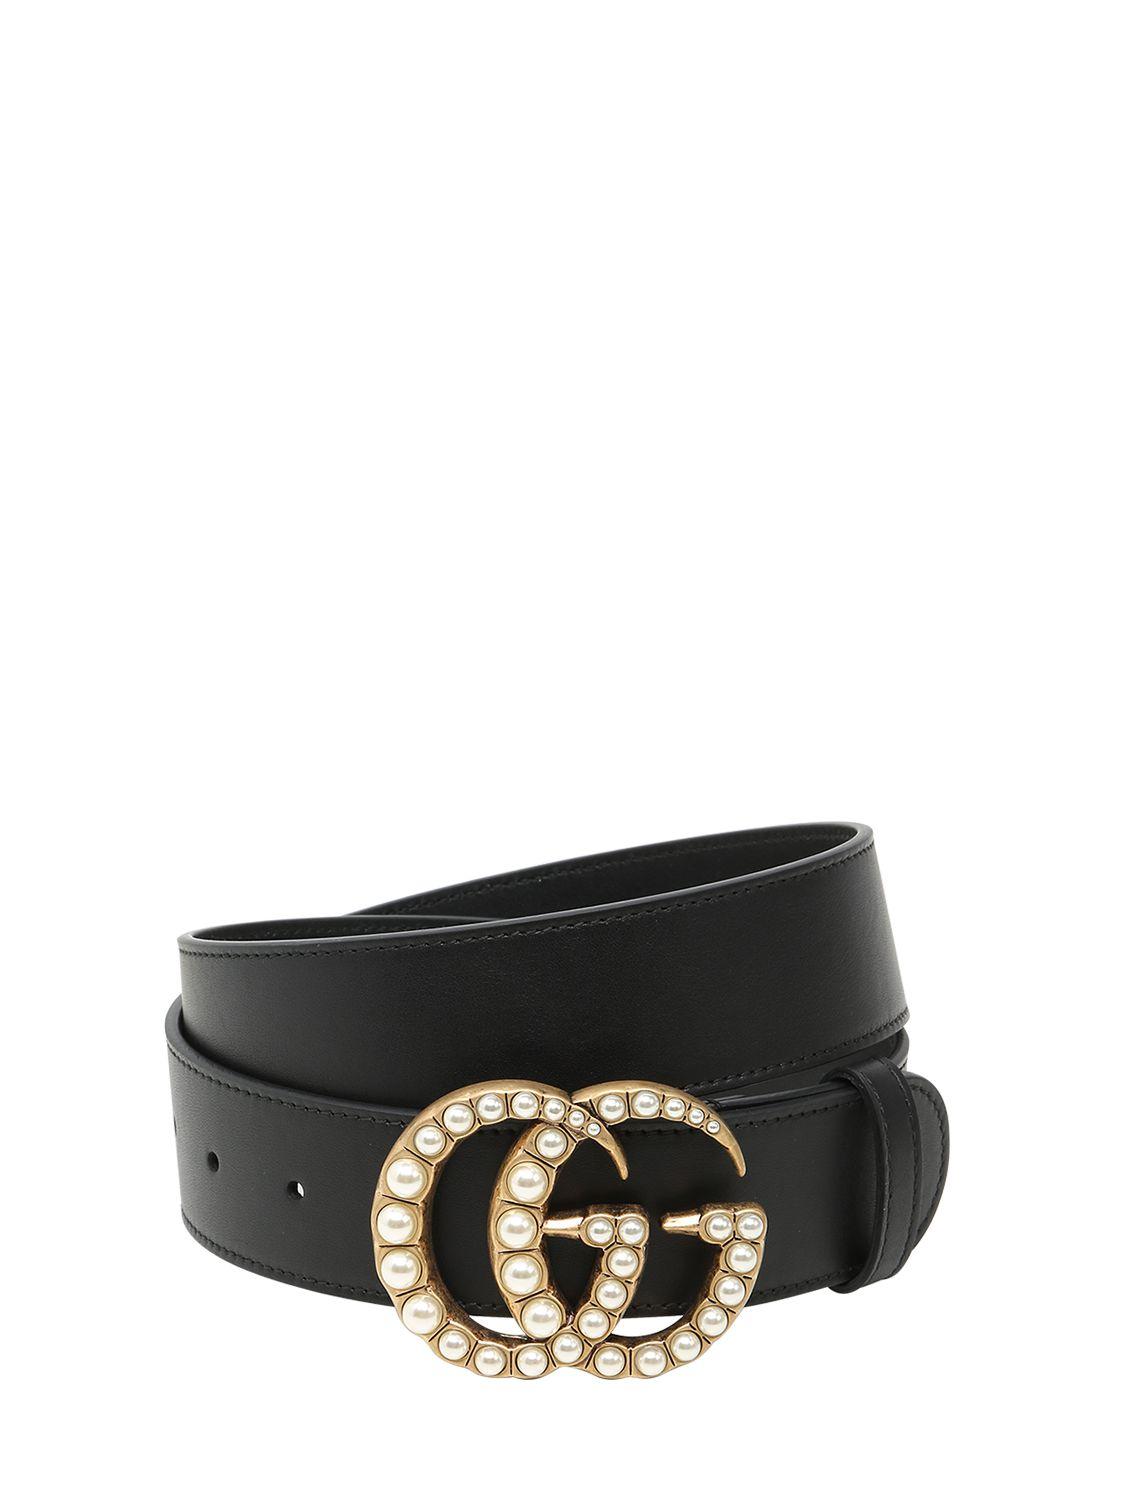 gucci women's belt with pearls, OFF 77 